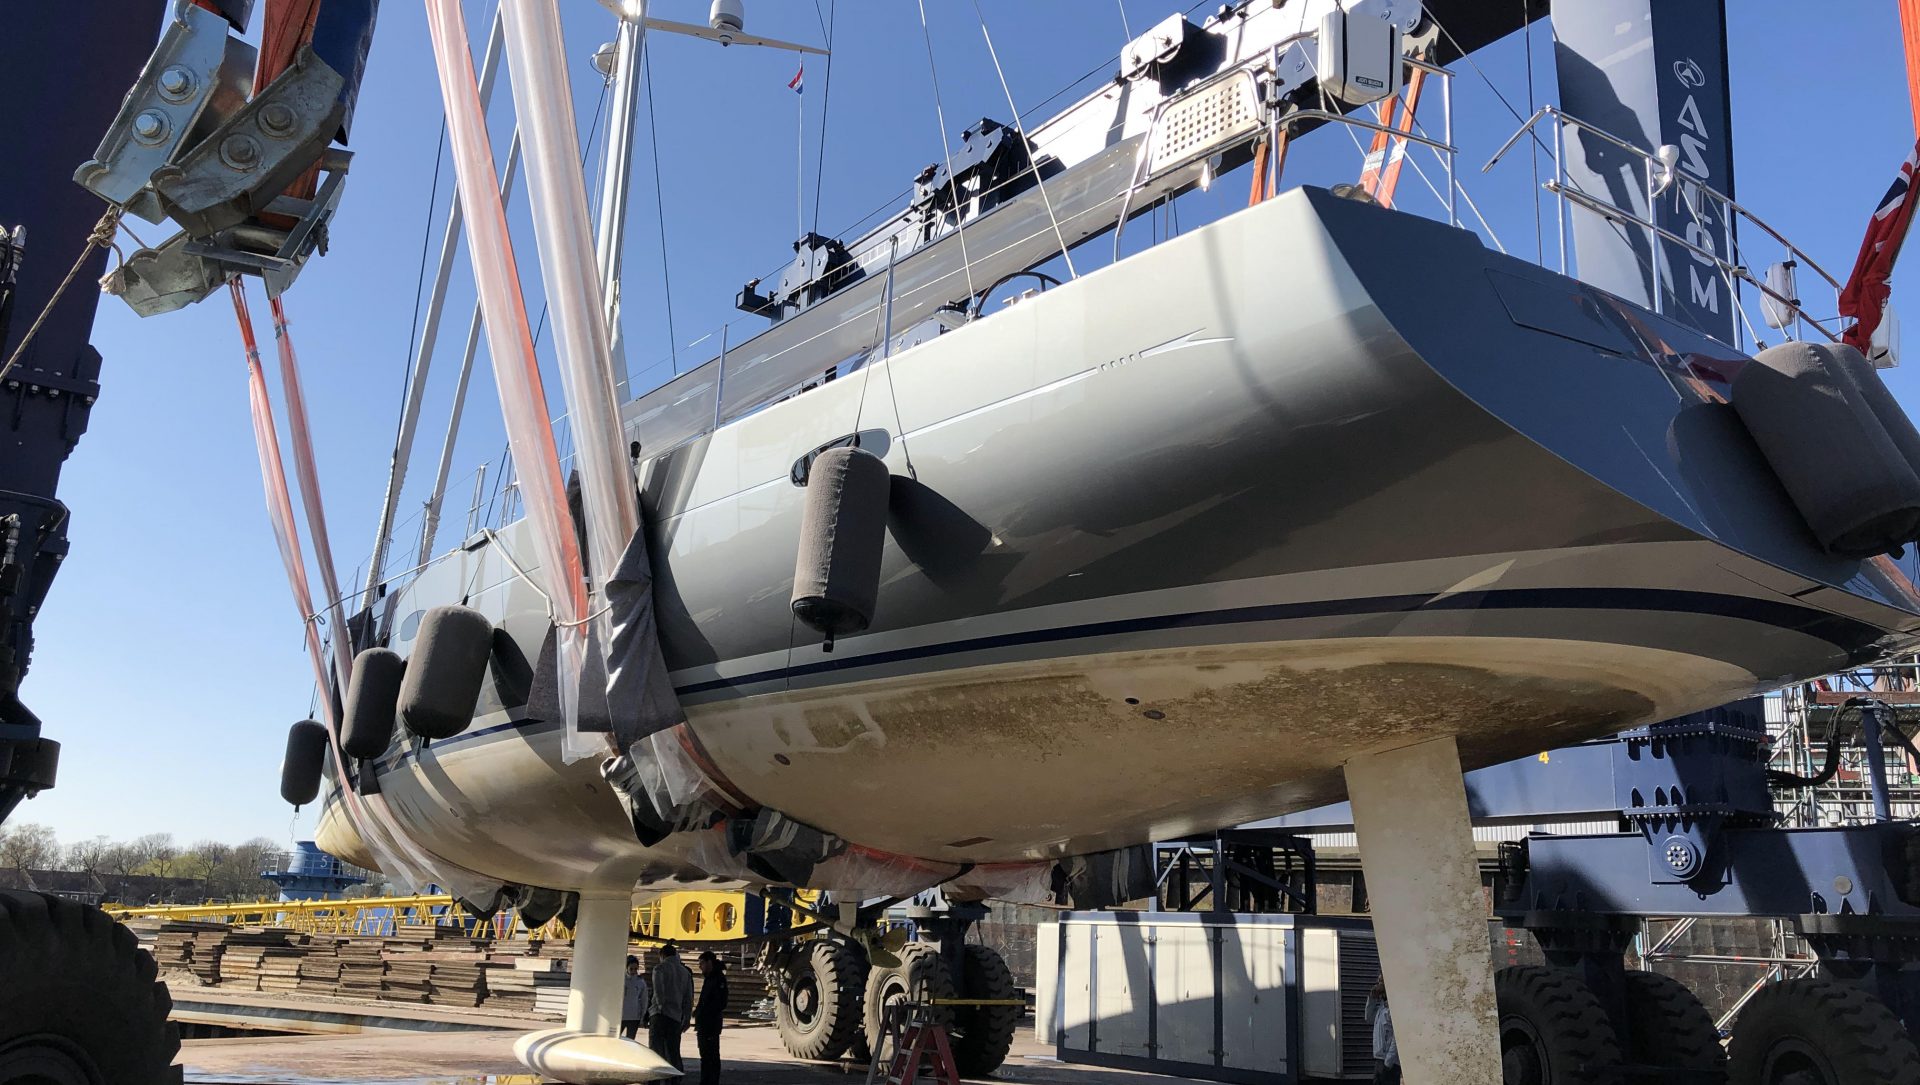 Hydraulic service and repair for yachts